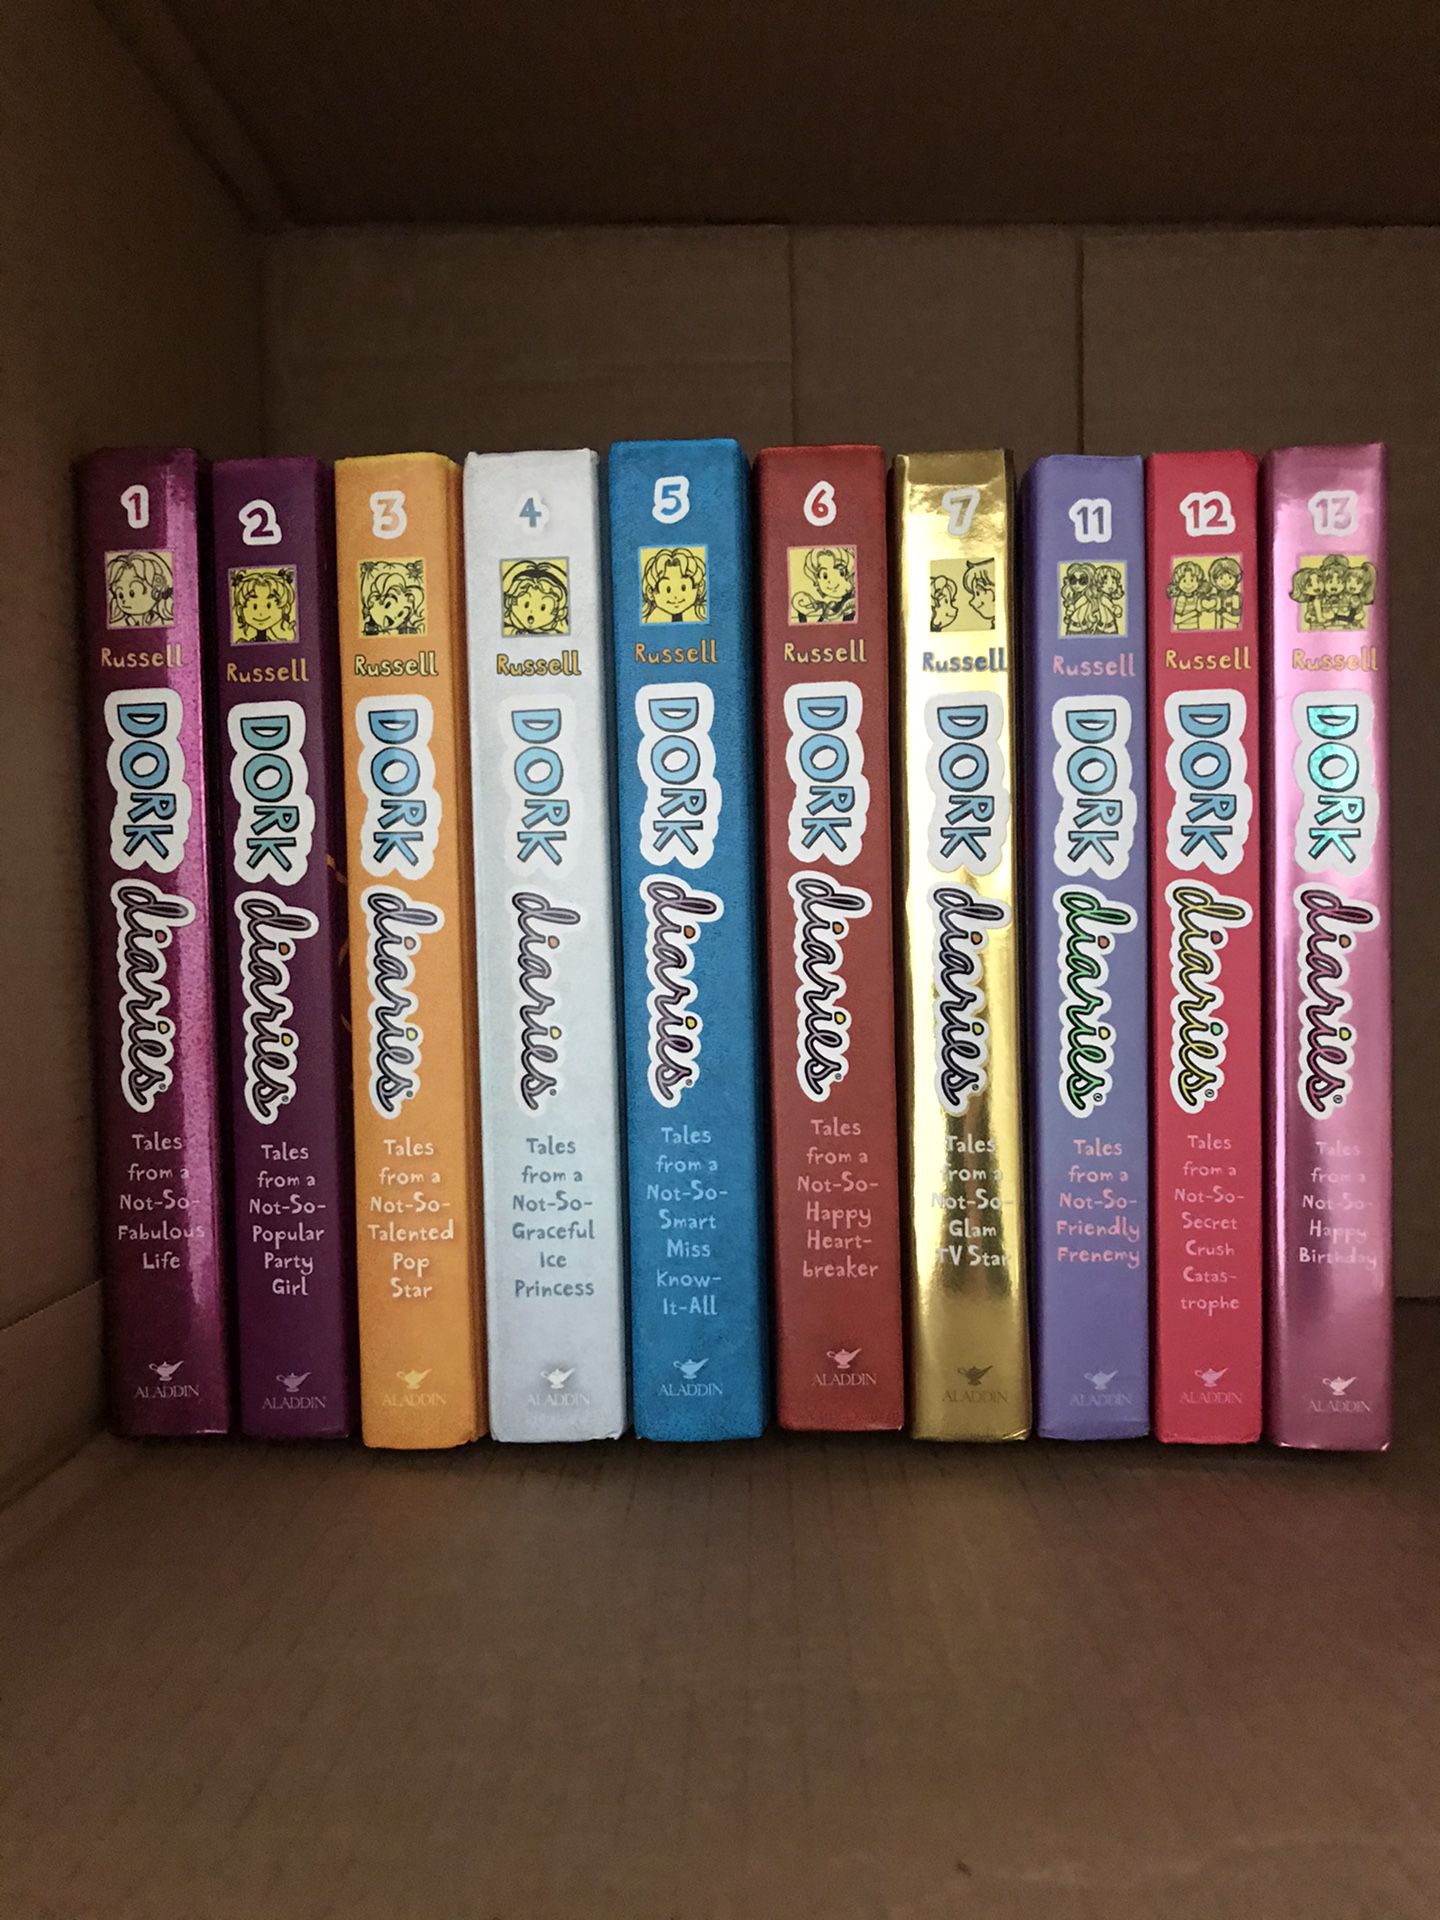 FREE!! “Dork Diaries” series. Pick up, no delivery.